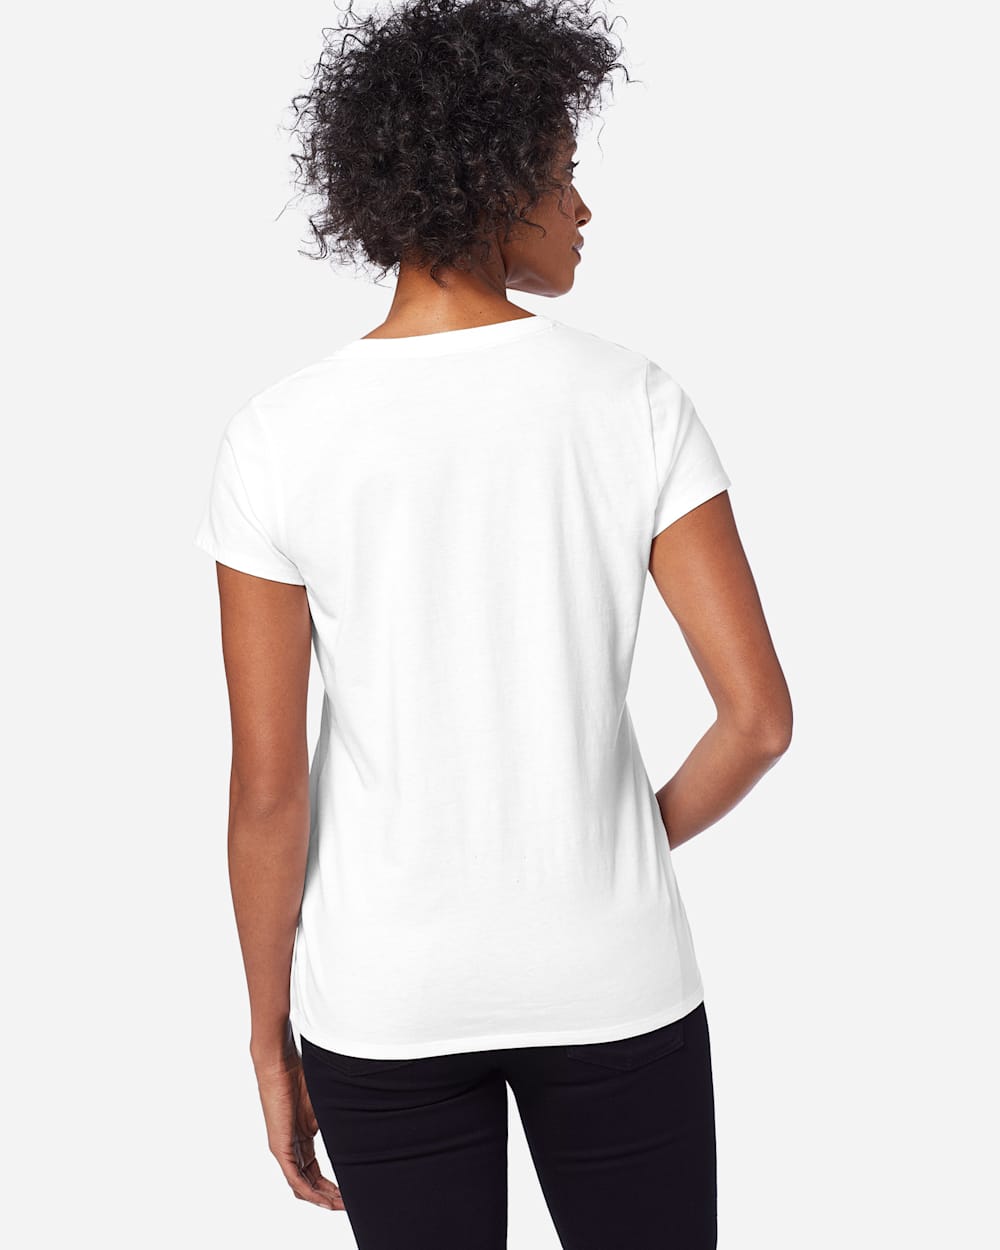 ADDITIONAL VIEW OF WOMEN'S HARDING GRAPHIC TEE IN WHITE image number 2